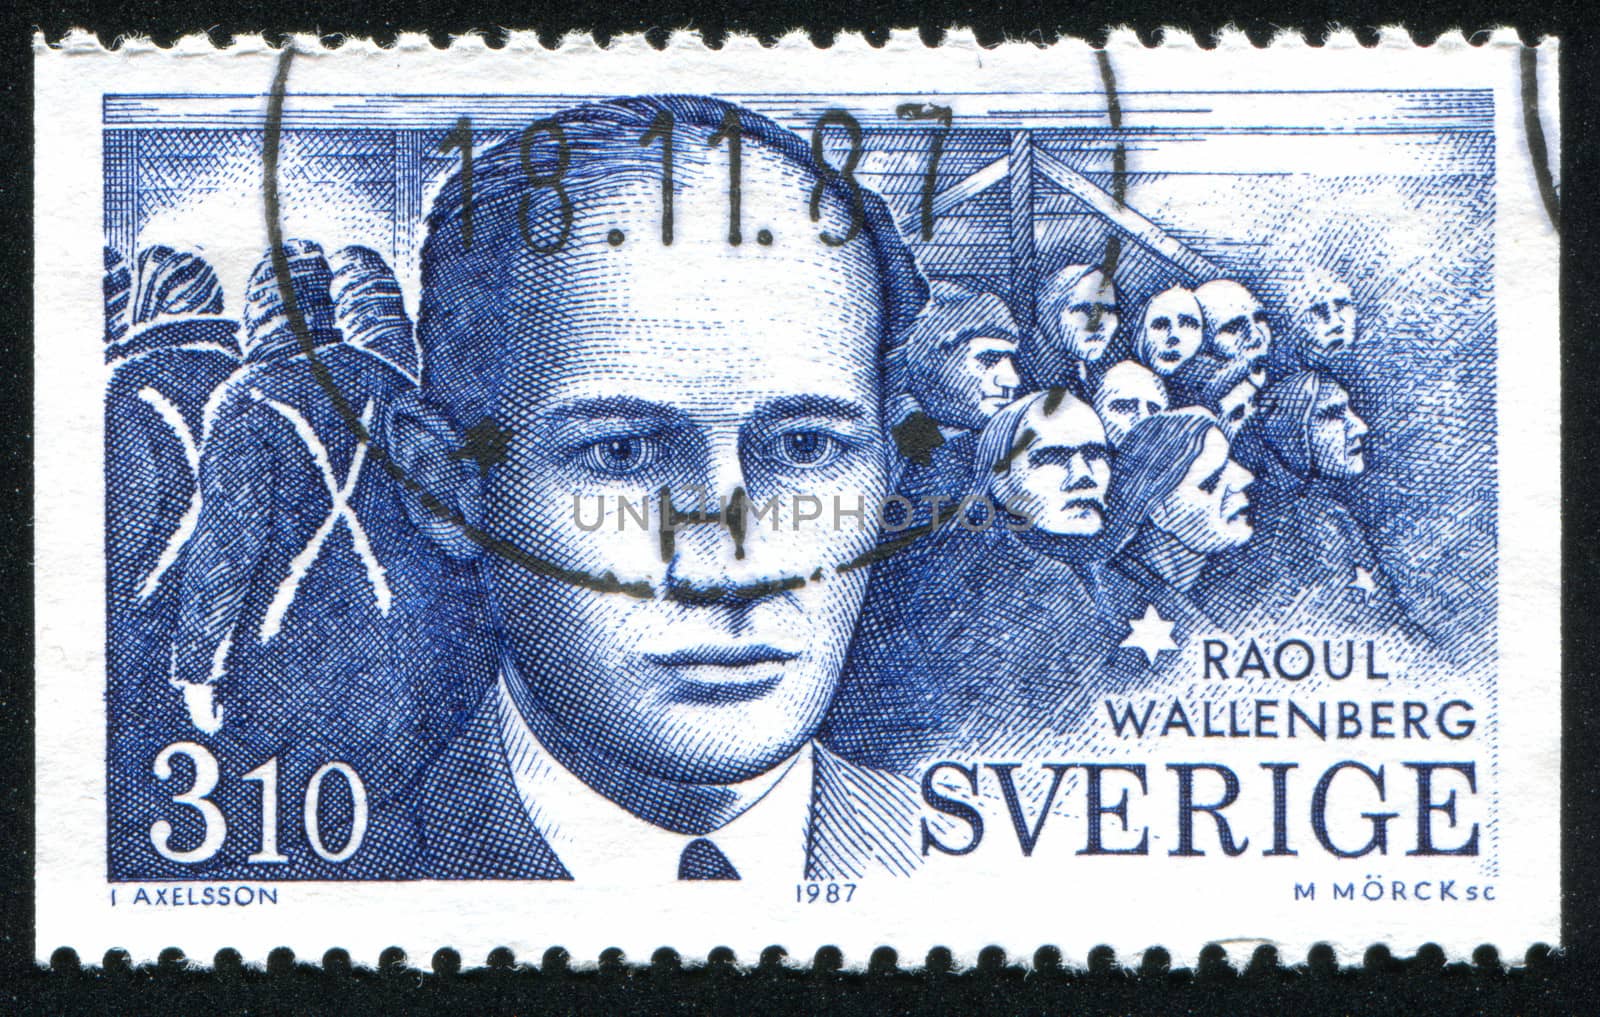 SWEDEN - CIRCA 1987: stamp printed by Sweden, shows Raoul Wallenberg, circa 1987